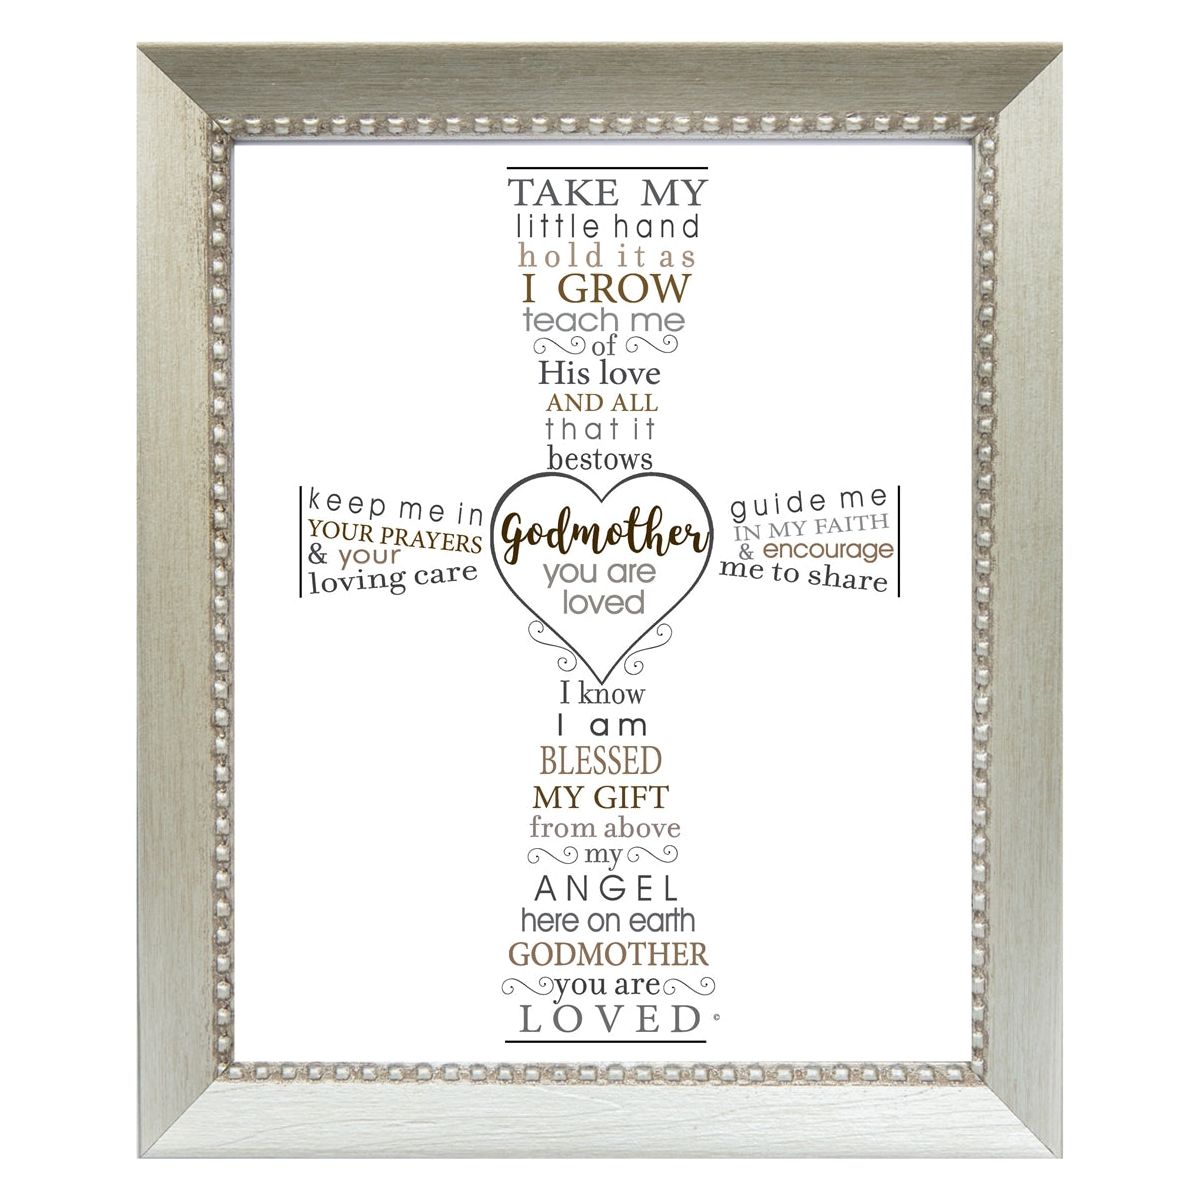 8x10 silver toned beaded wood frame with "Godmother you are loved" poem.